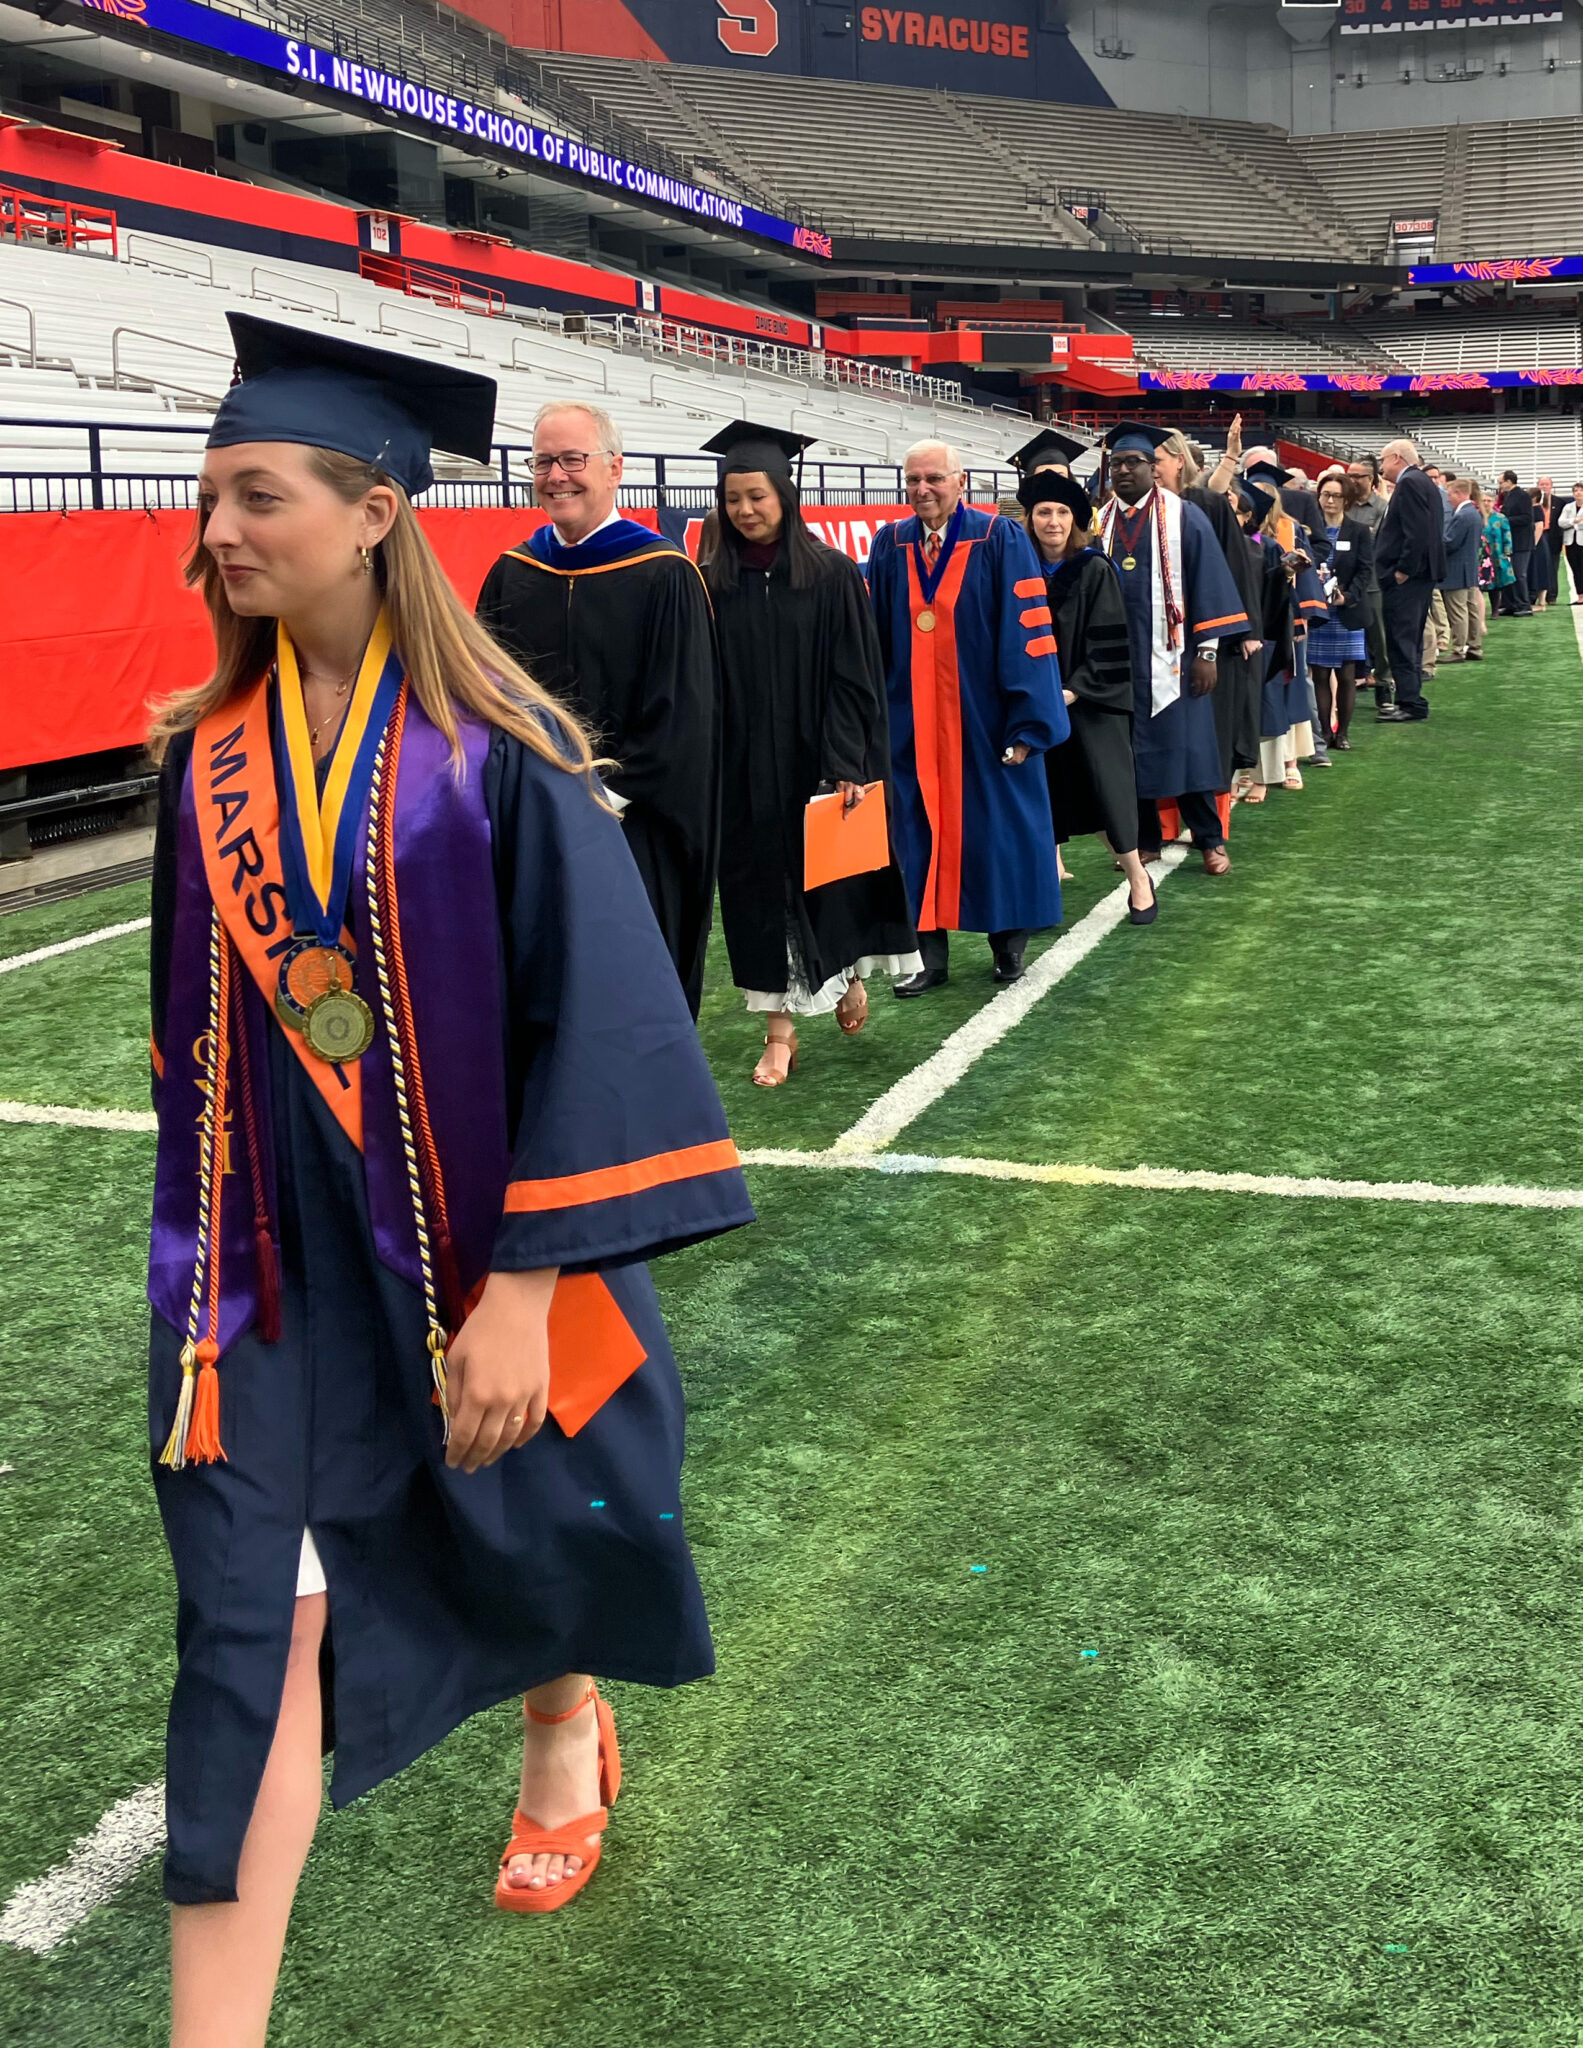 People in graduation caps and gowns walk to a stage before a ceremony